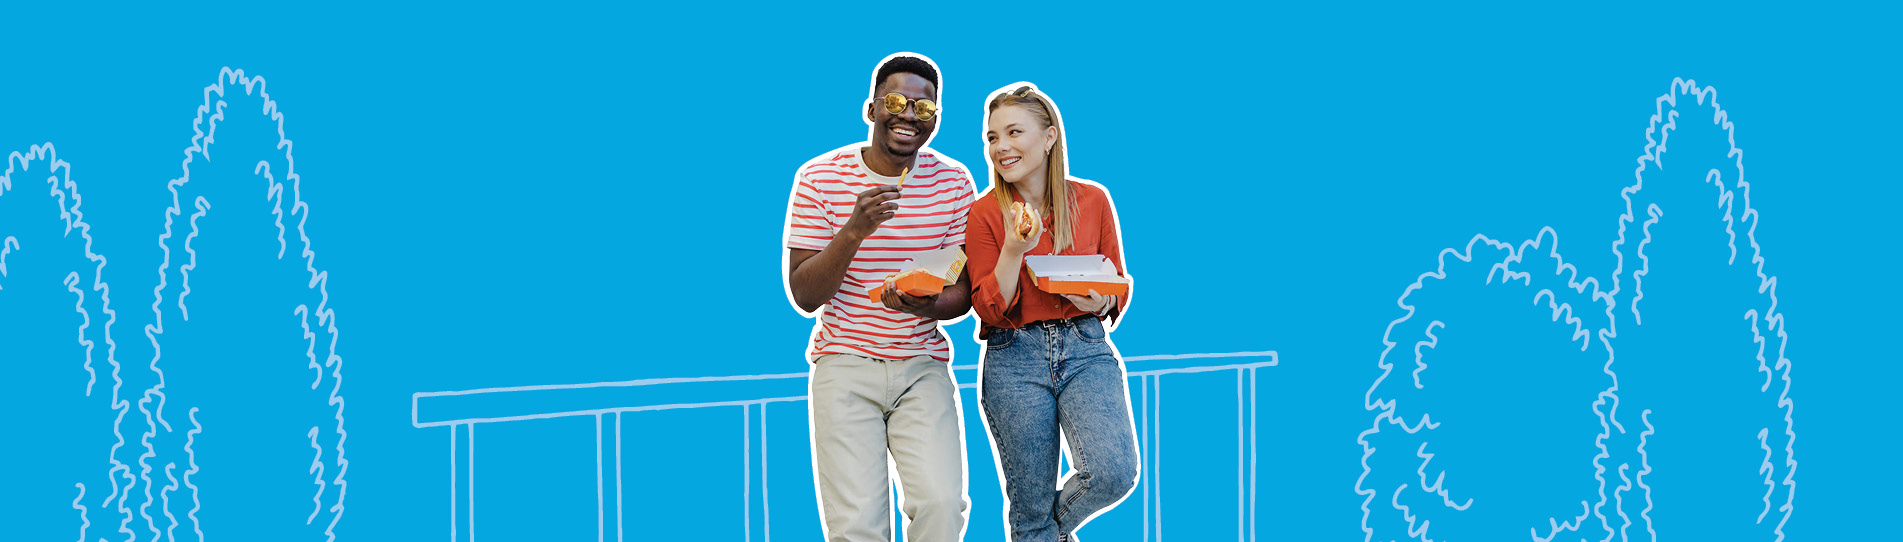 young people smiling with food